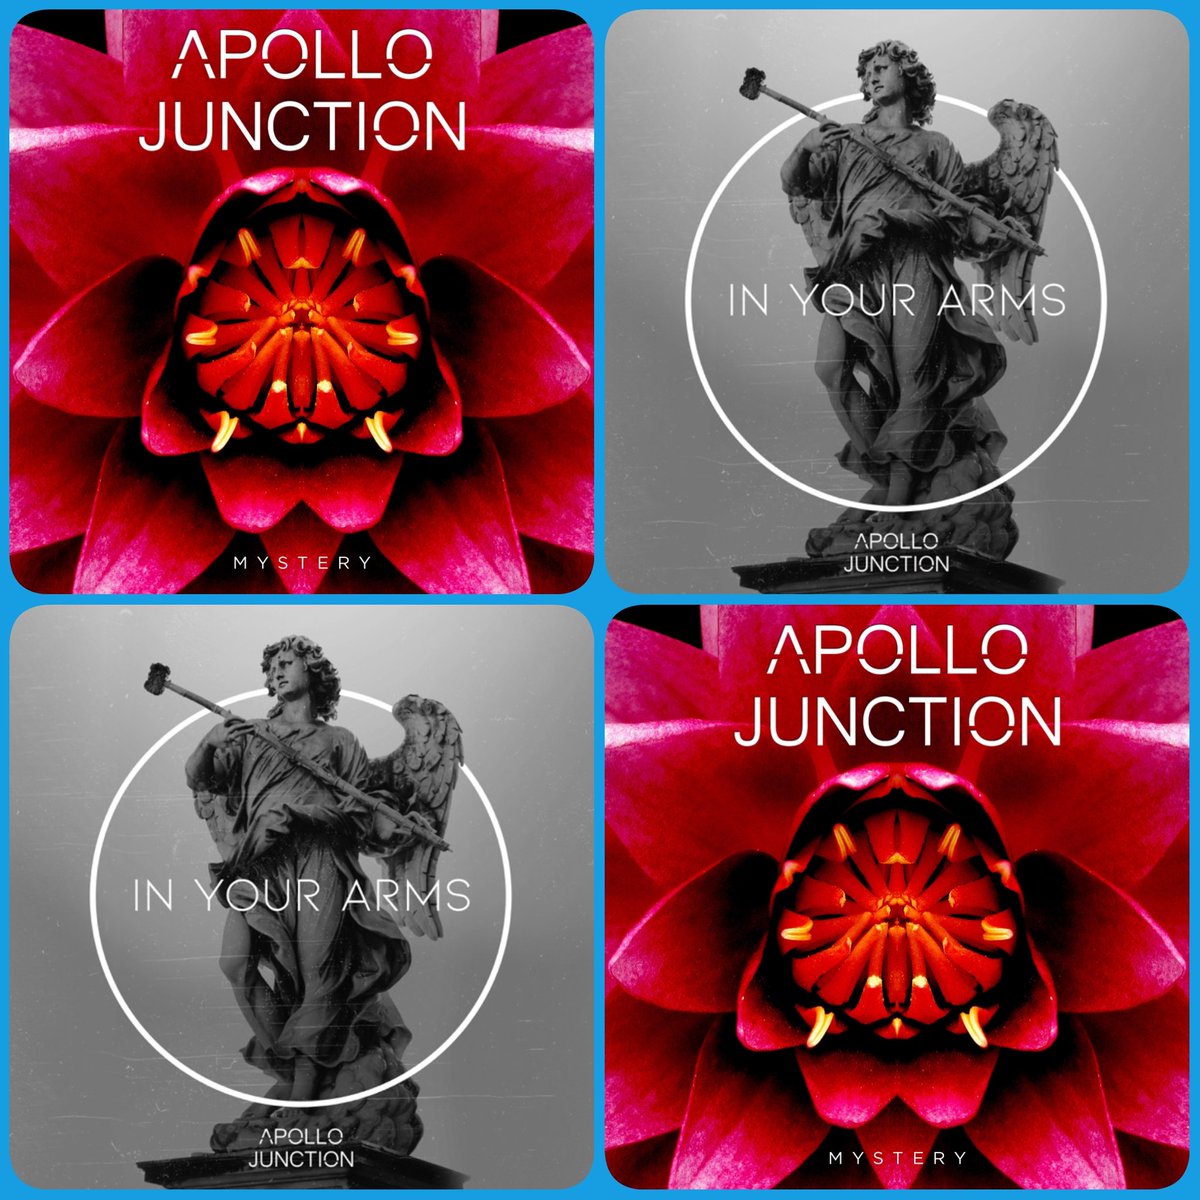 #SongOfTheDay / #ChansonDuJour

@ApolloJunction : In Your Arms

Love this song so so much and love this band so so much ❤❤❤

youtu.be/nGzzLimJwd4

#Indiemusic #ukmusic #TrackOfTheDay #Indie #music #ApolloJunction #love   #Favourite #Britpop #Musician  #IndiePopRock #Leeds